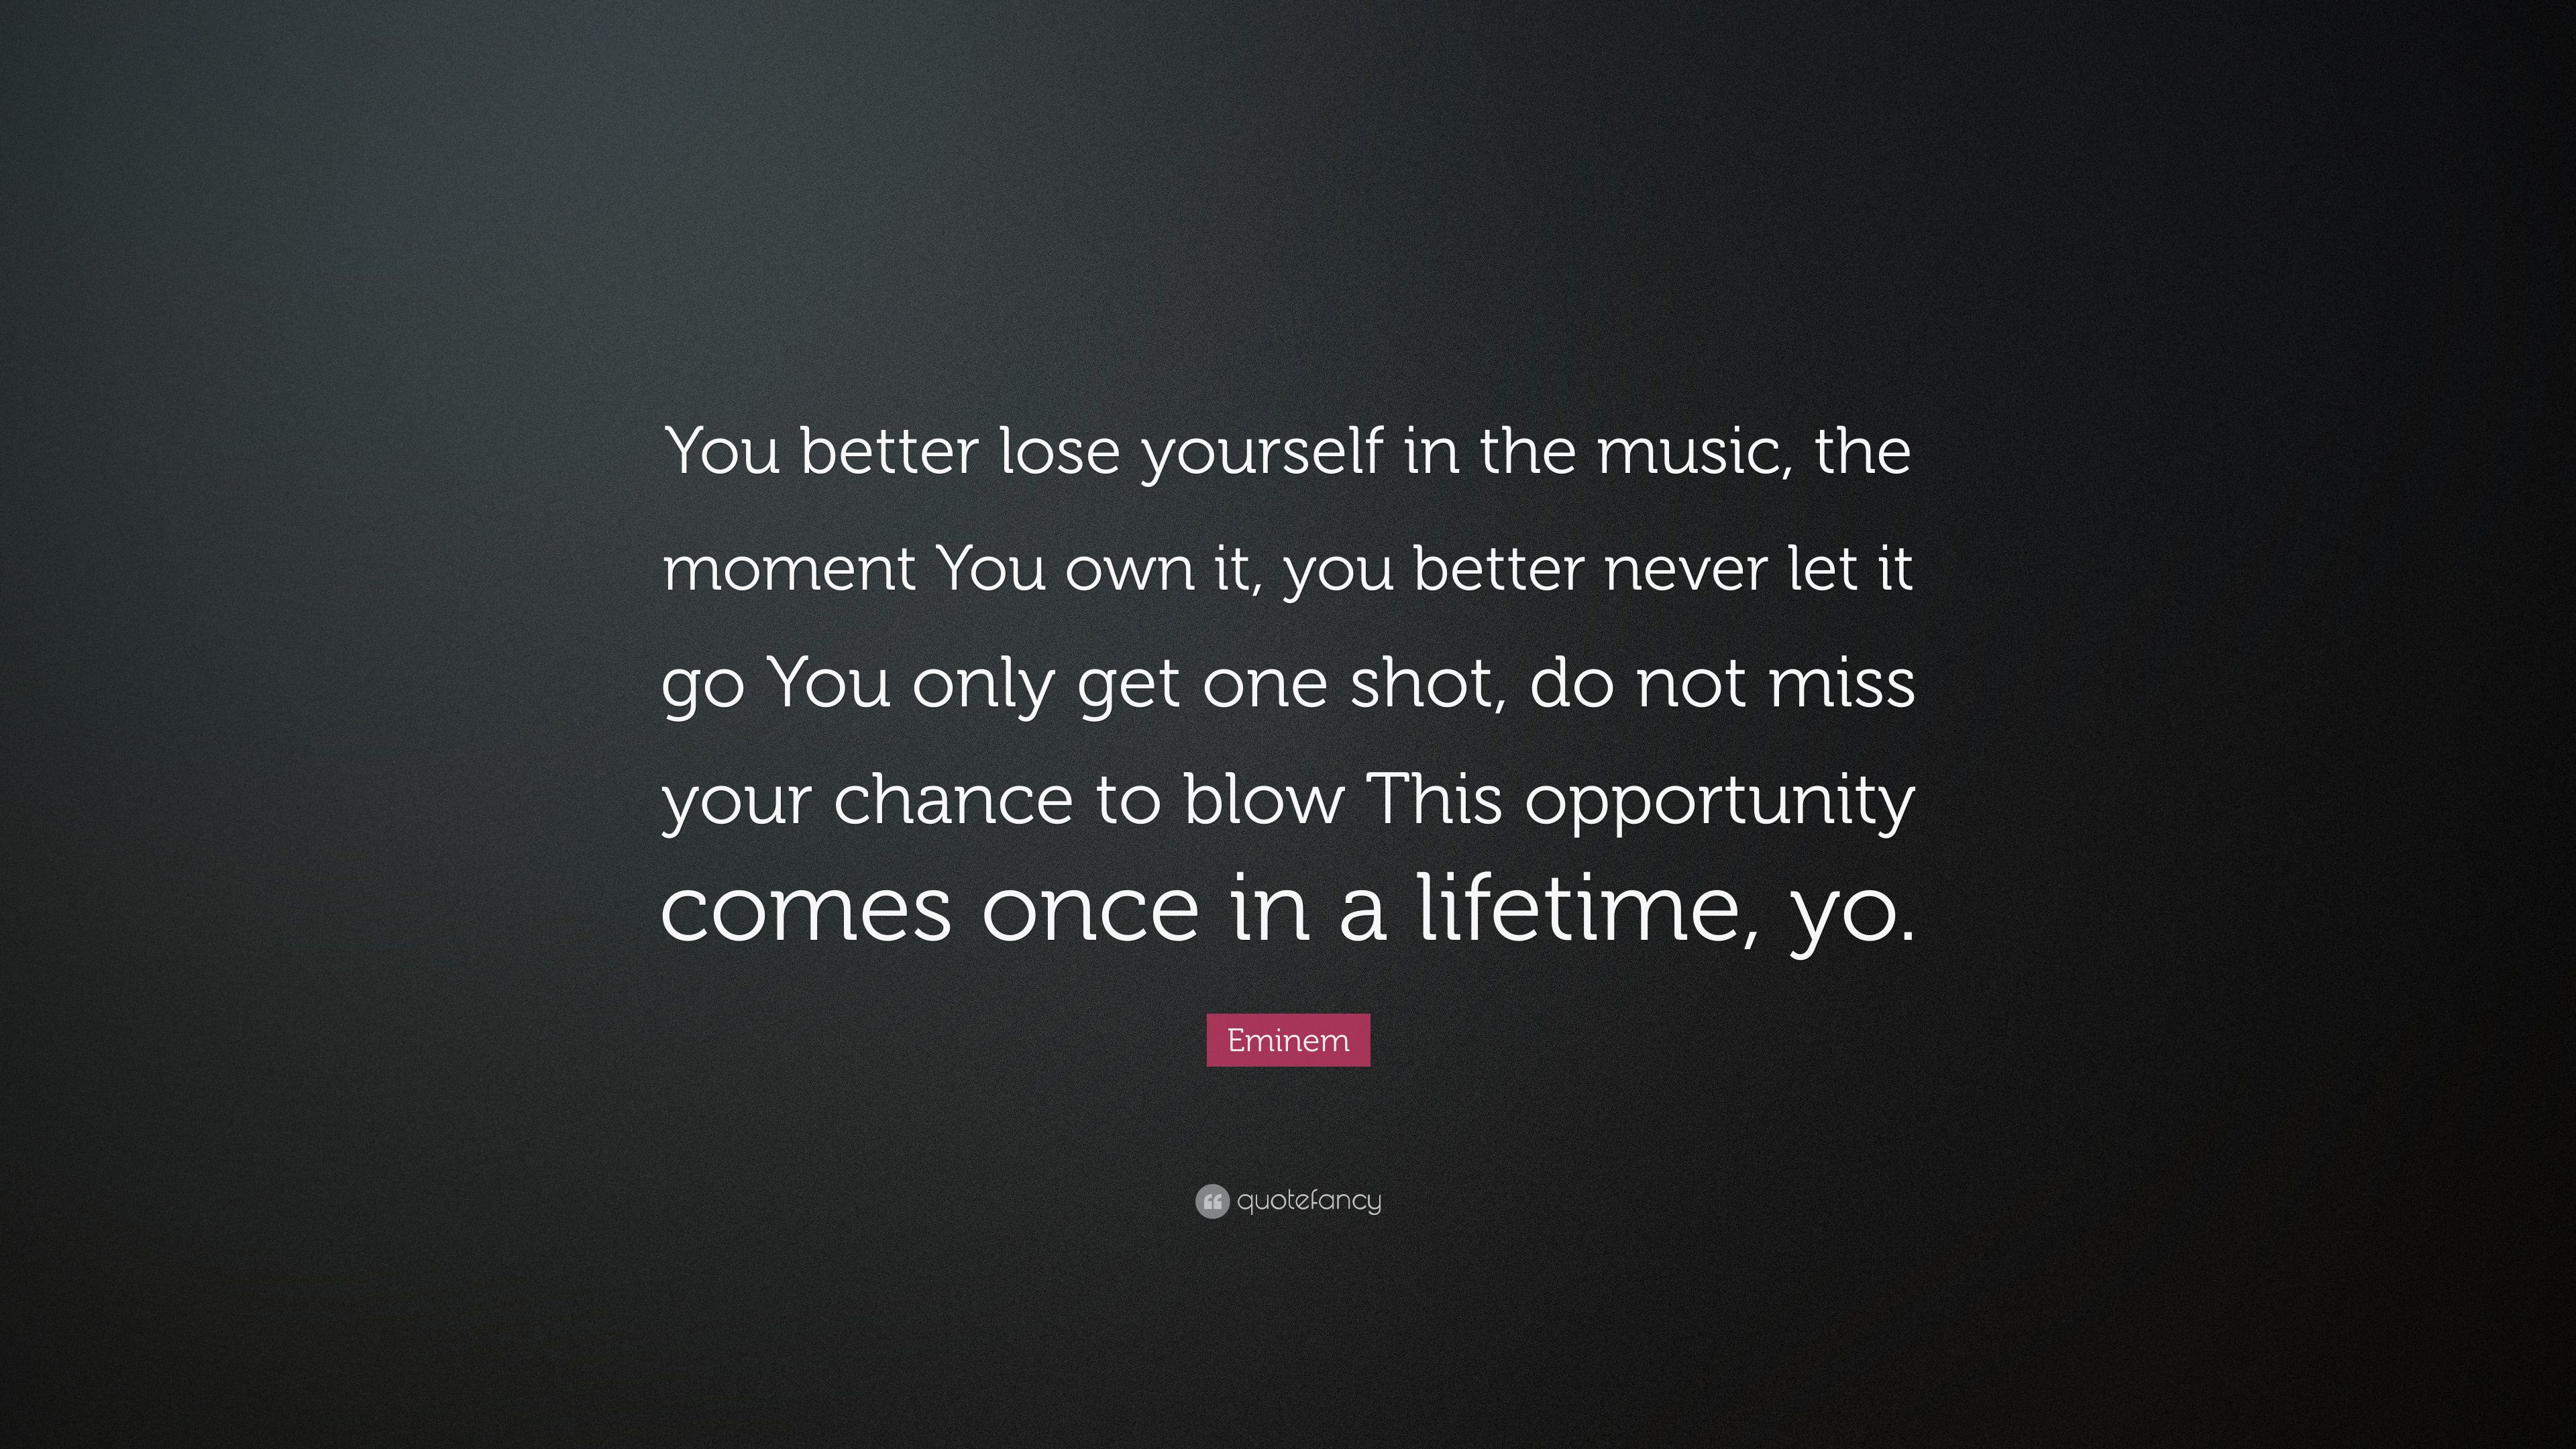 Eminem Quote: “You better lose yourself in the music, the moment